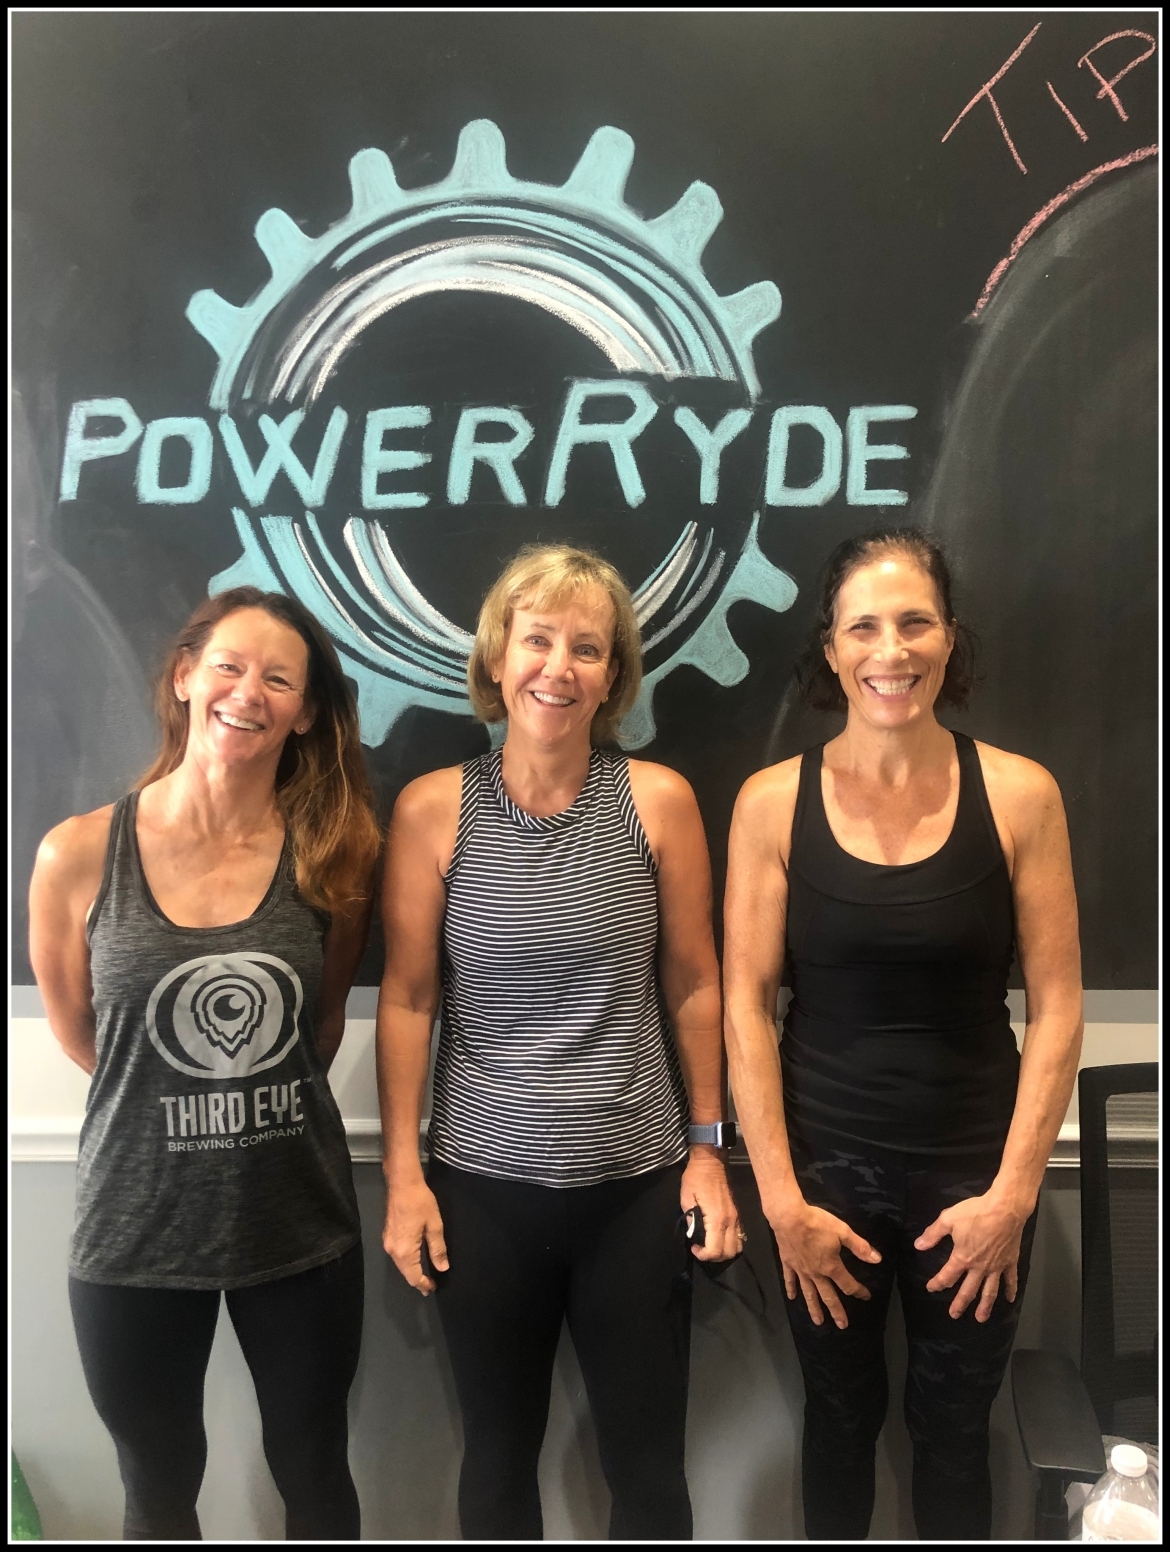 Jenny Lytle, Michelle Groene, and Susan Raftrey in front of chalk PowerRyde logo